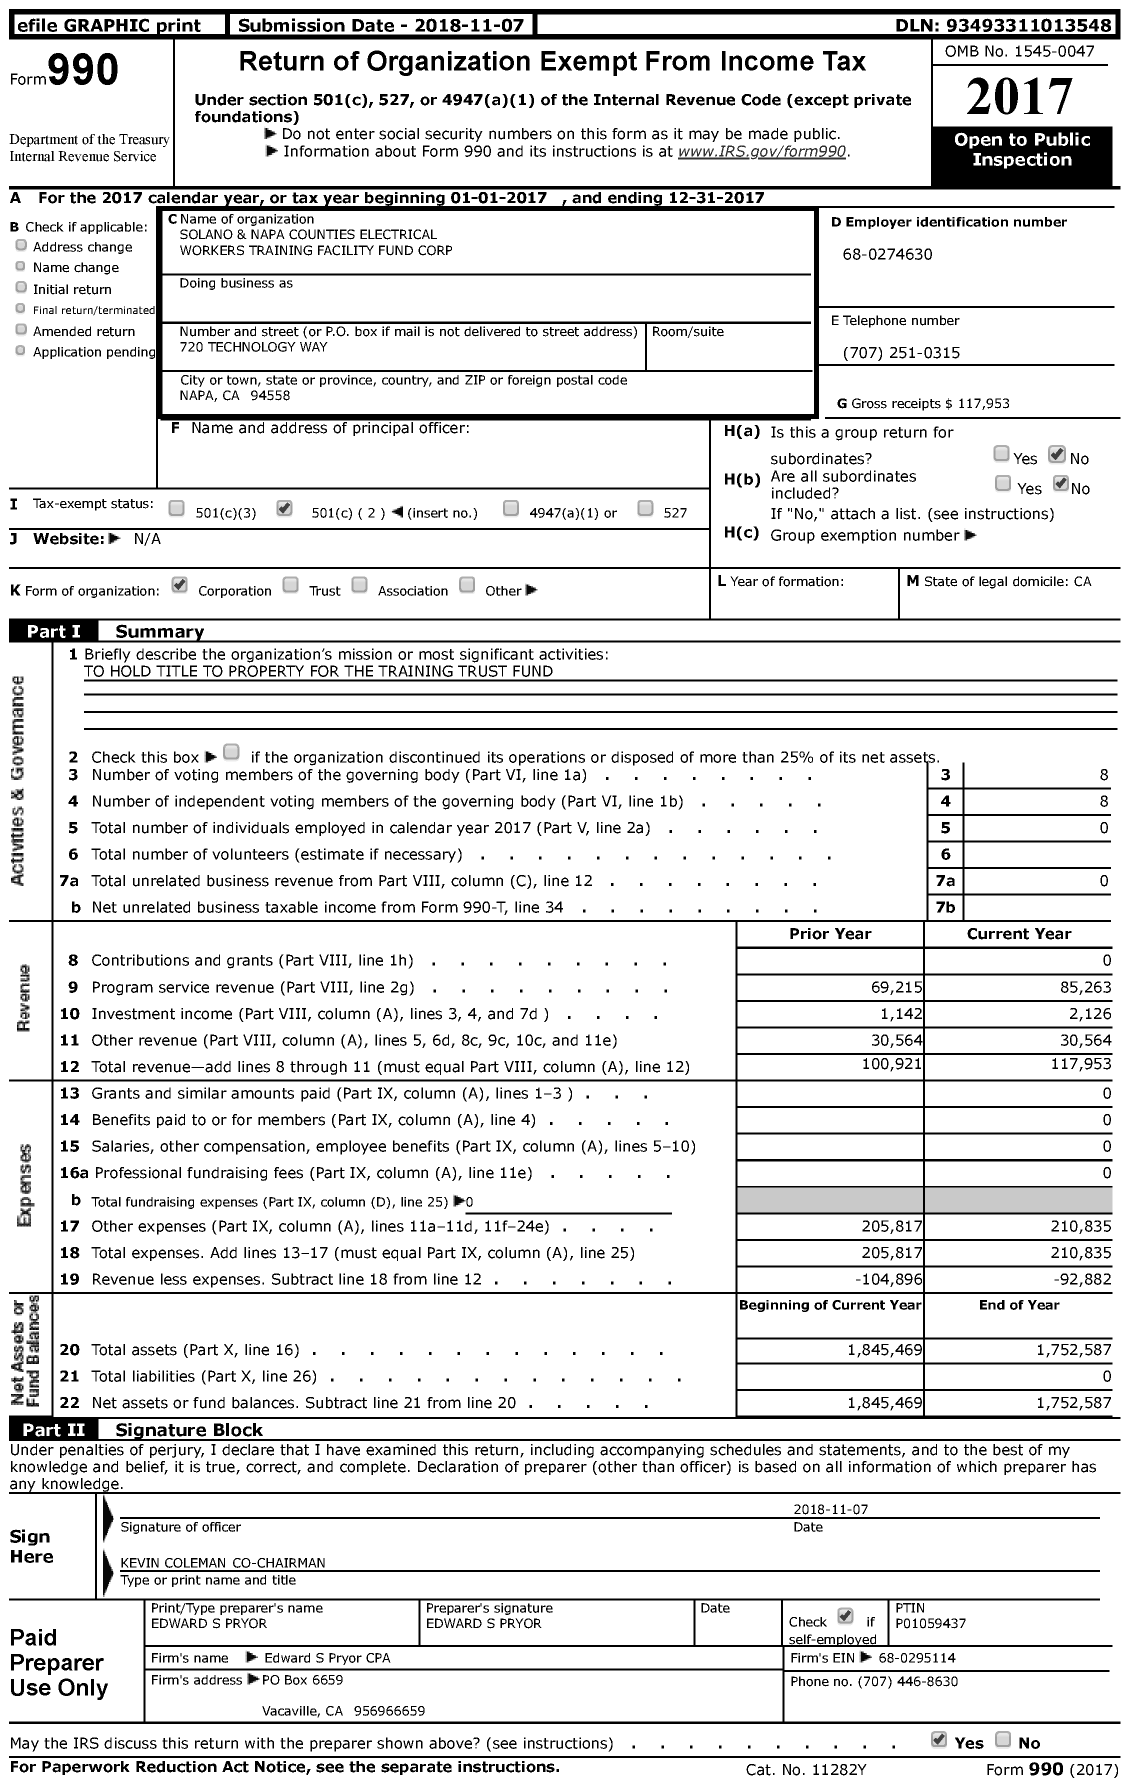 Image of first page of 2017 Form 990 for Solano and Napa Counties Electrical Workers Training Facility Fund Corporation